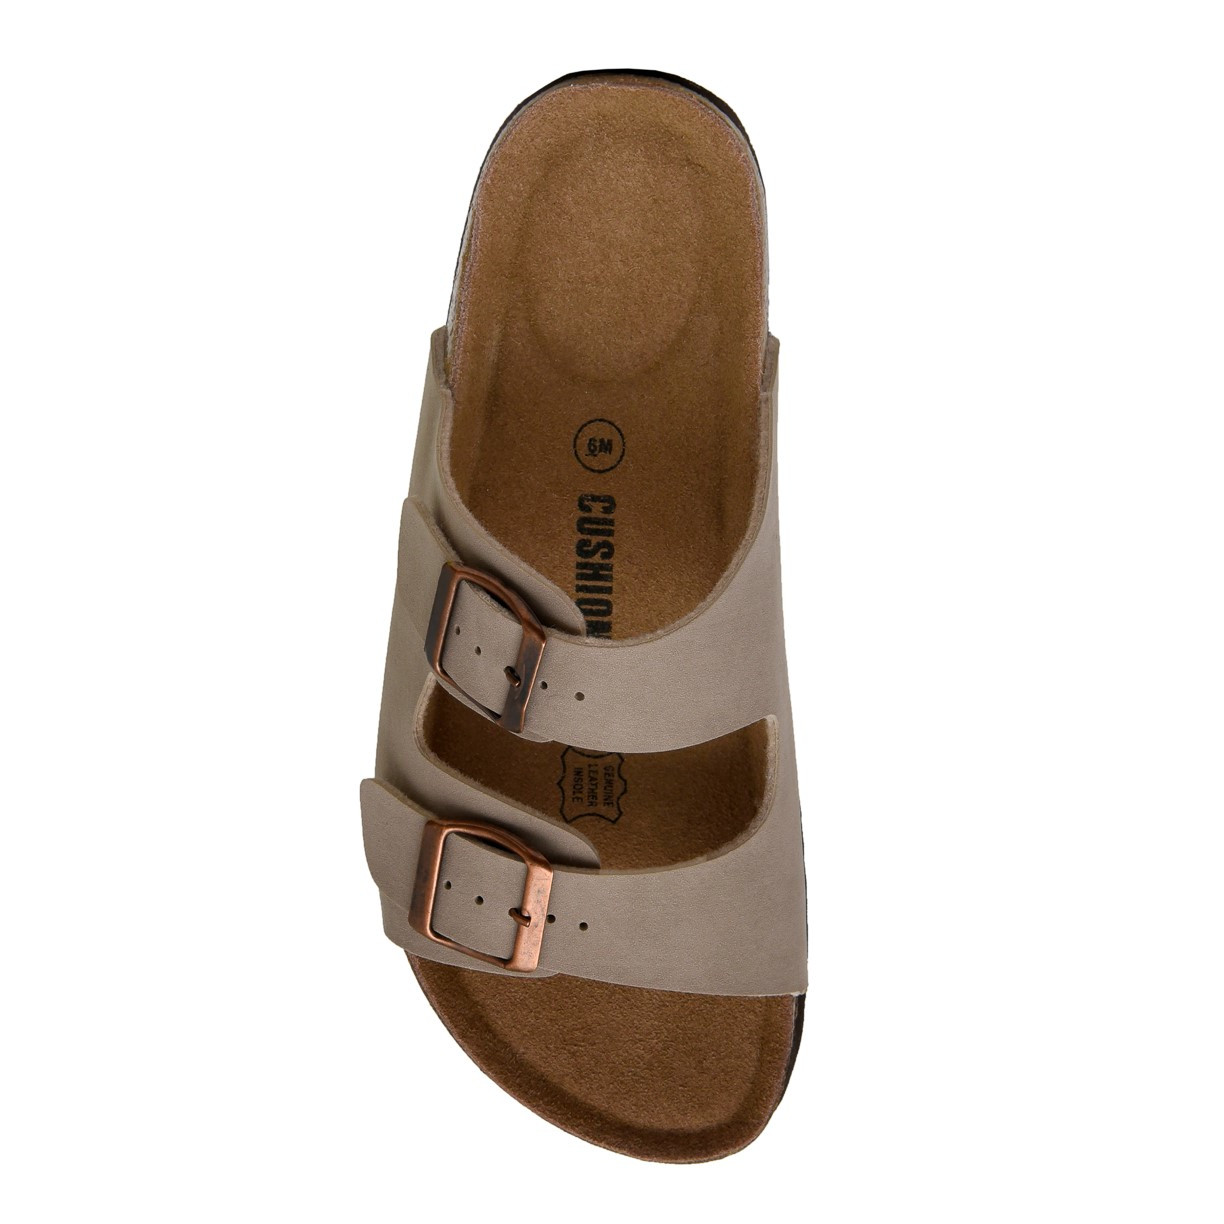 CUSHIONAIRE Women's Lane Cork Footbed Sandal with +Comfort - image 5 of 5